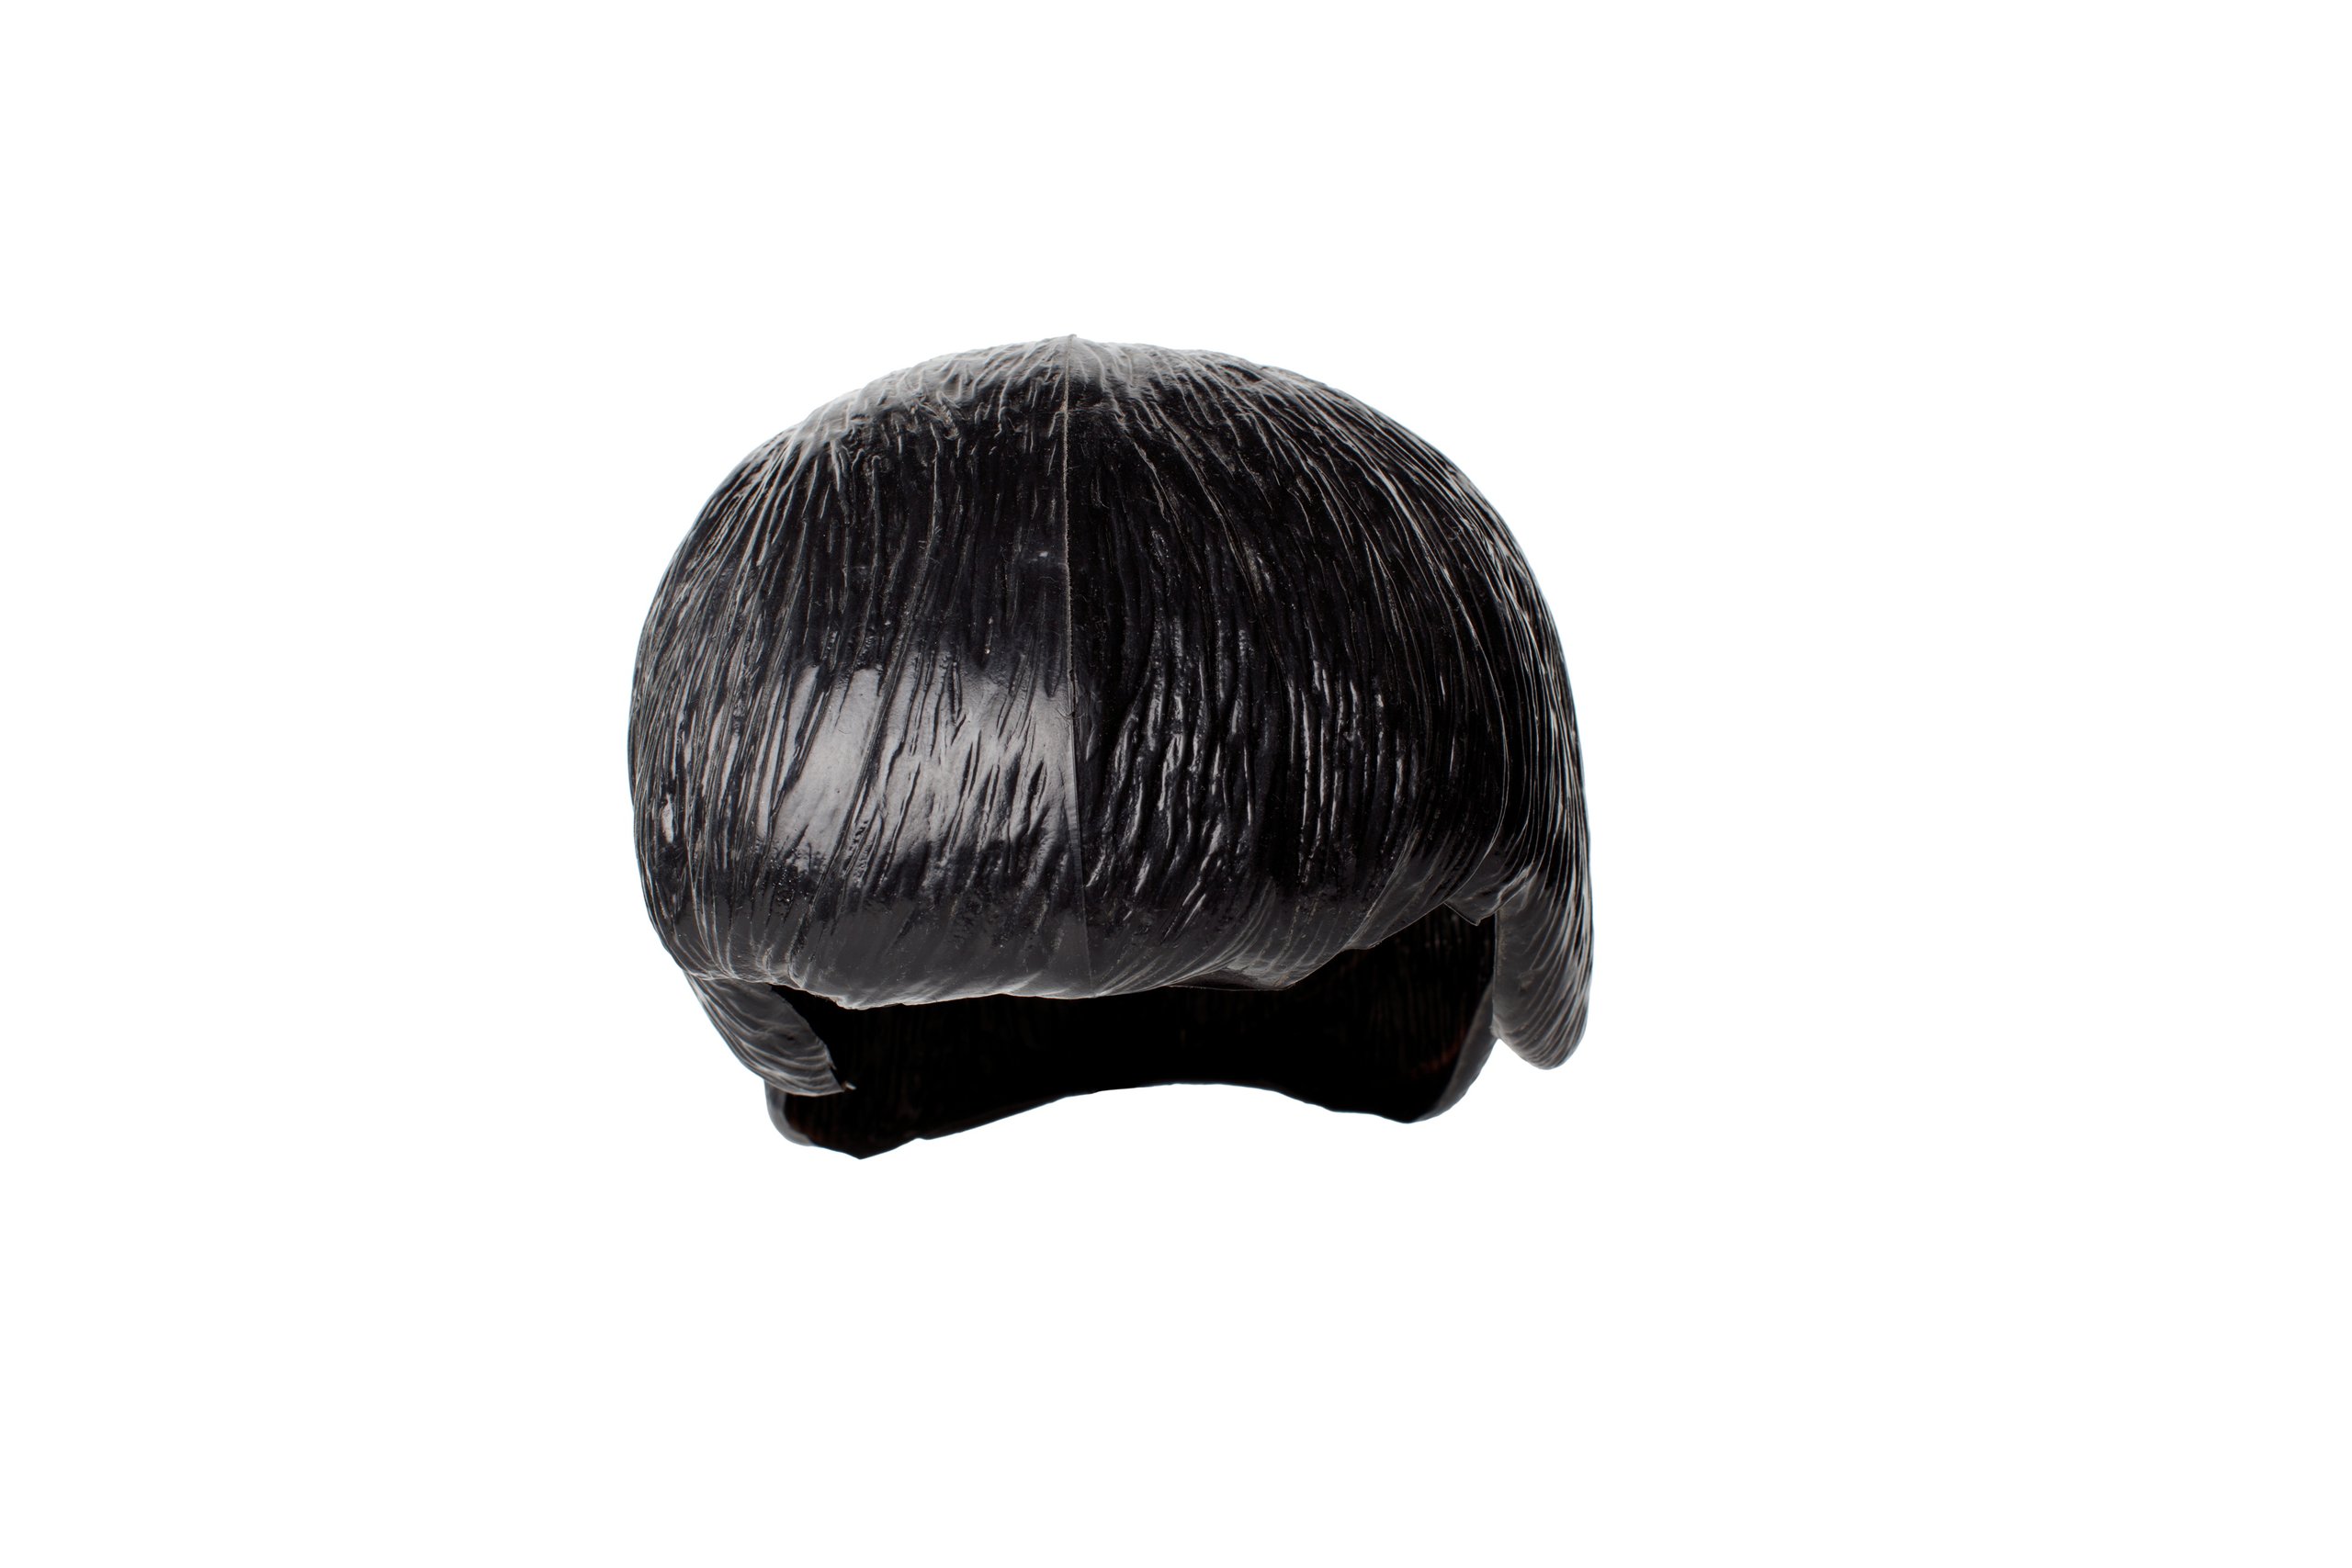 The Beatles wig